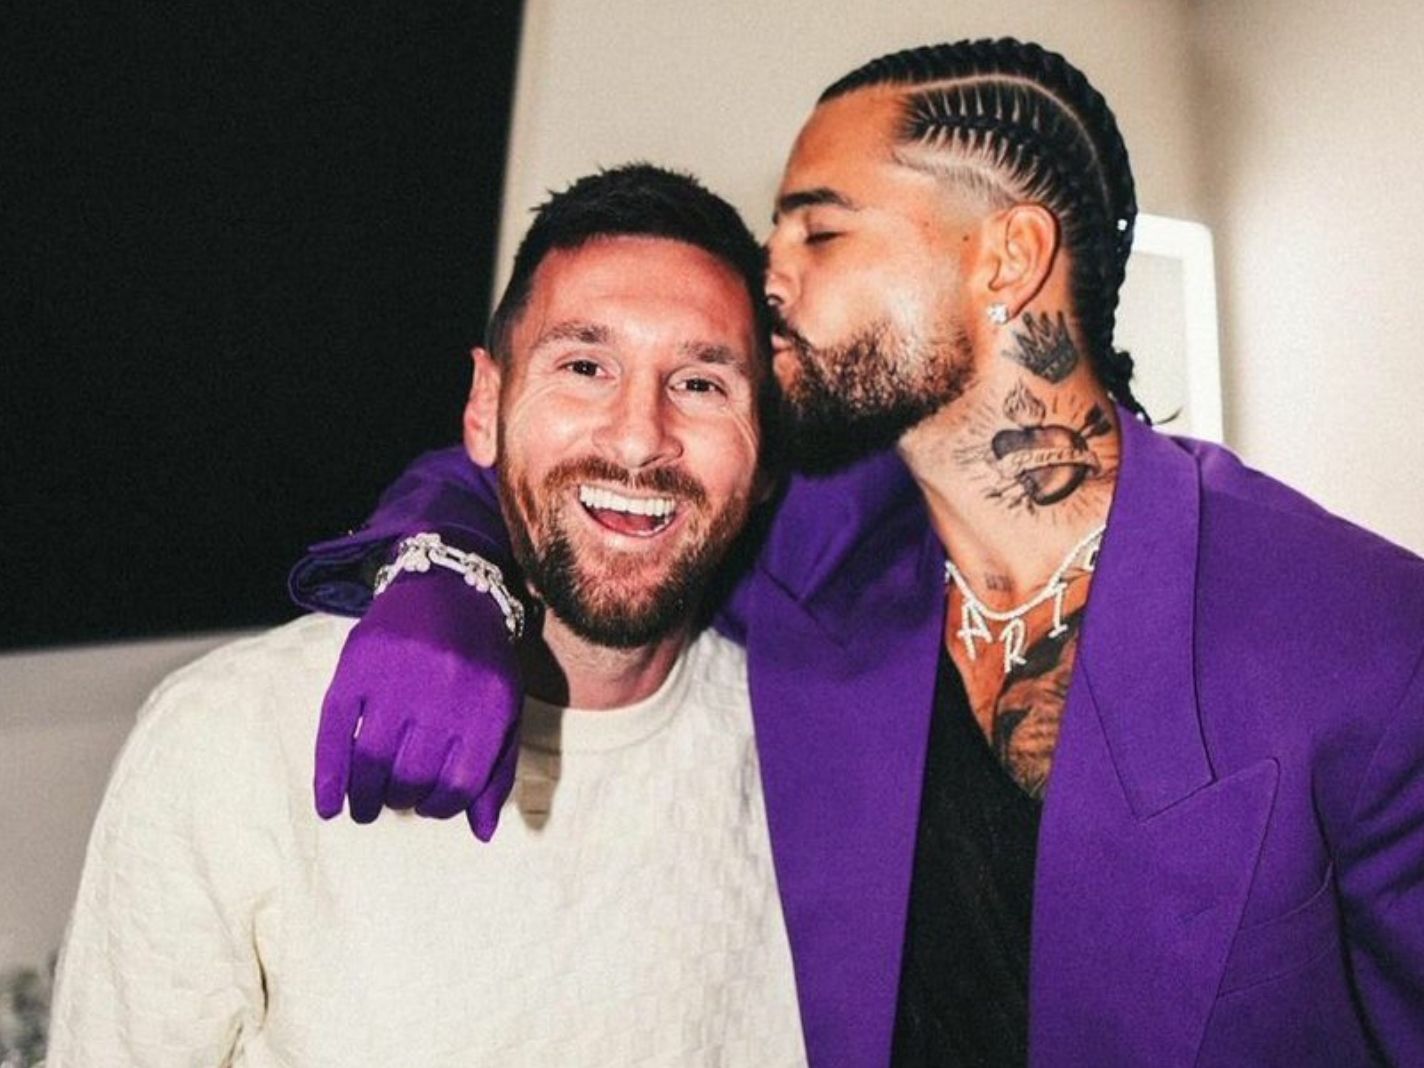 Lionel Messi Caught Vibing to Maluma Live: What Other Music Does He Listen To?